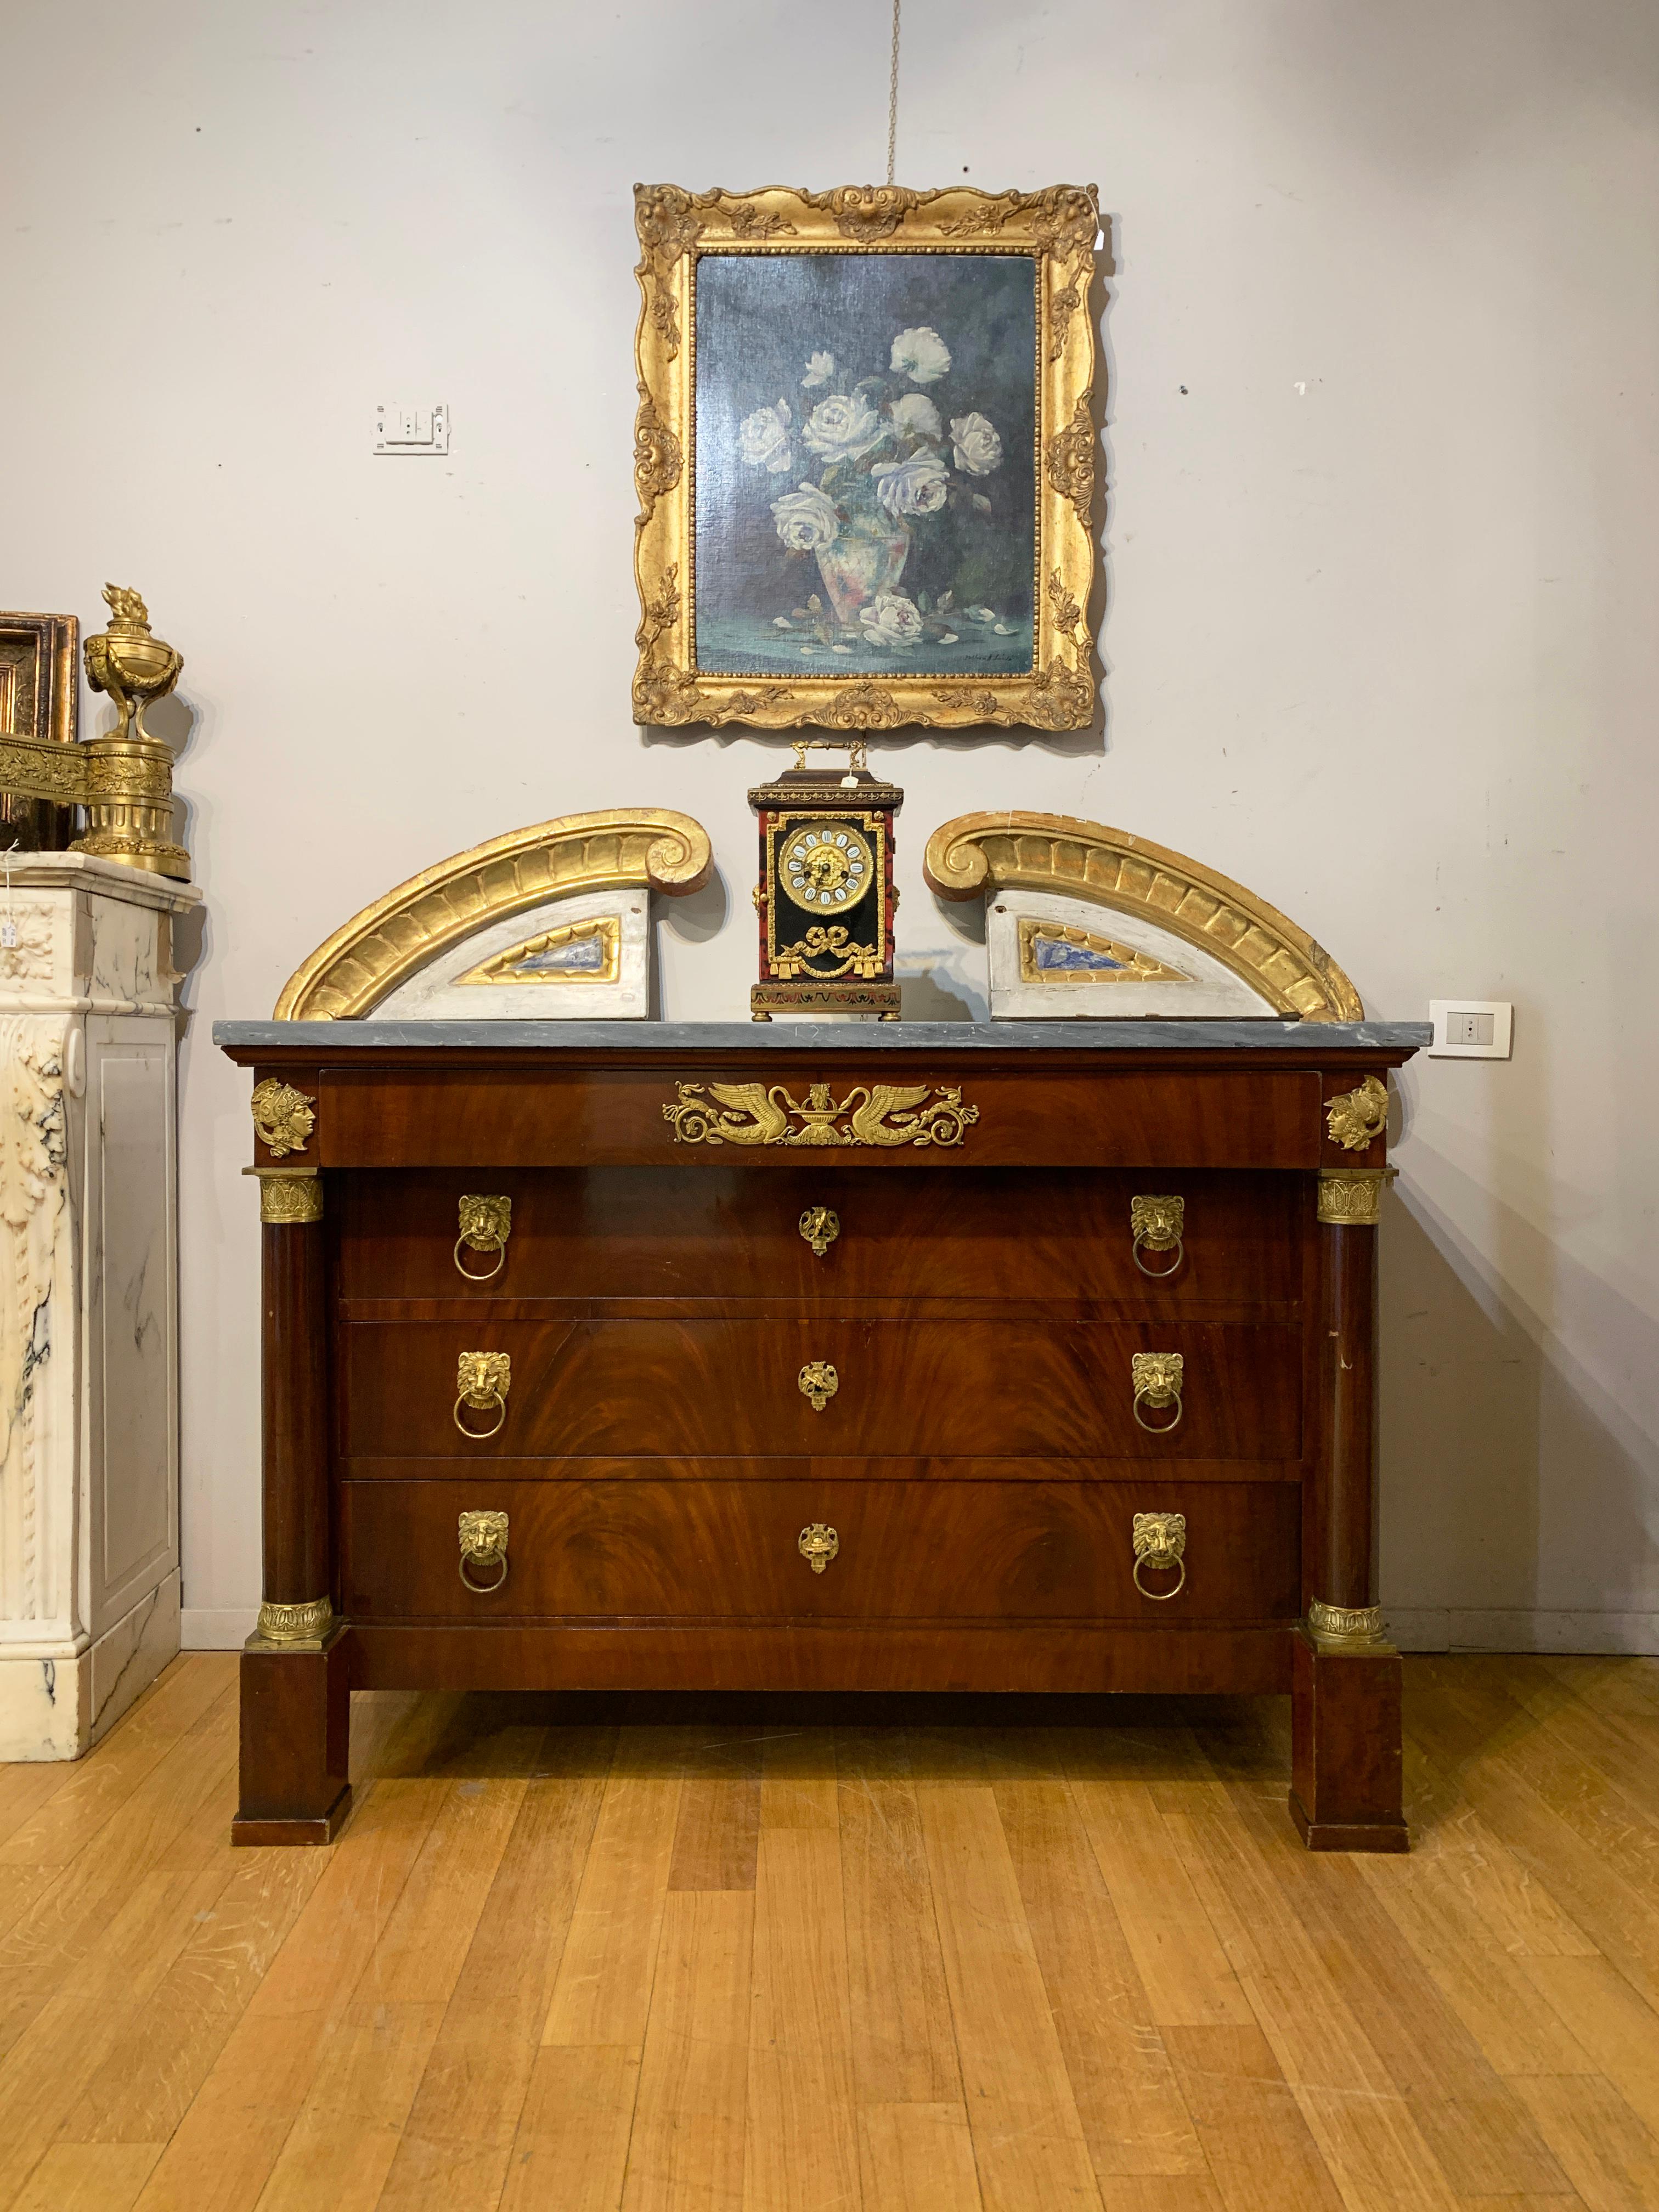 Elegant chest of drawers from the Empire period in mahogany feather with lost wax cast and gilded bronze friezes. The chest of drawers has three large drawers and a smaller one below the top. The corners of the chest of drawers are also